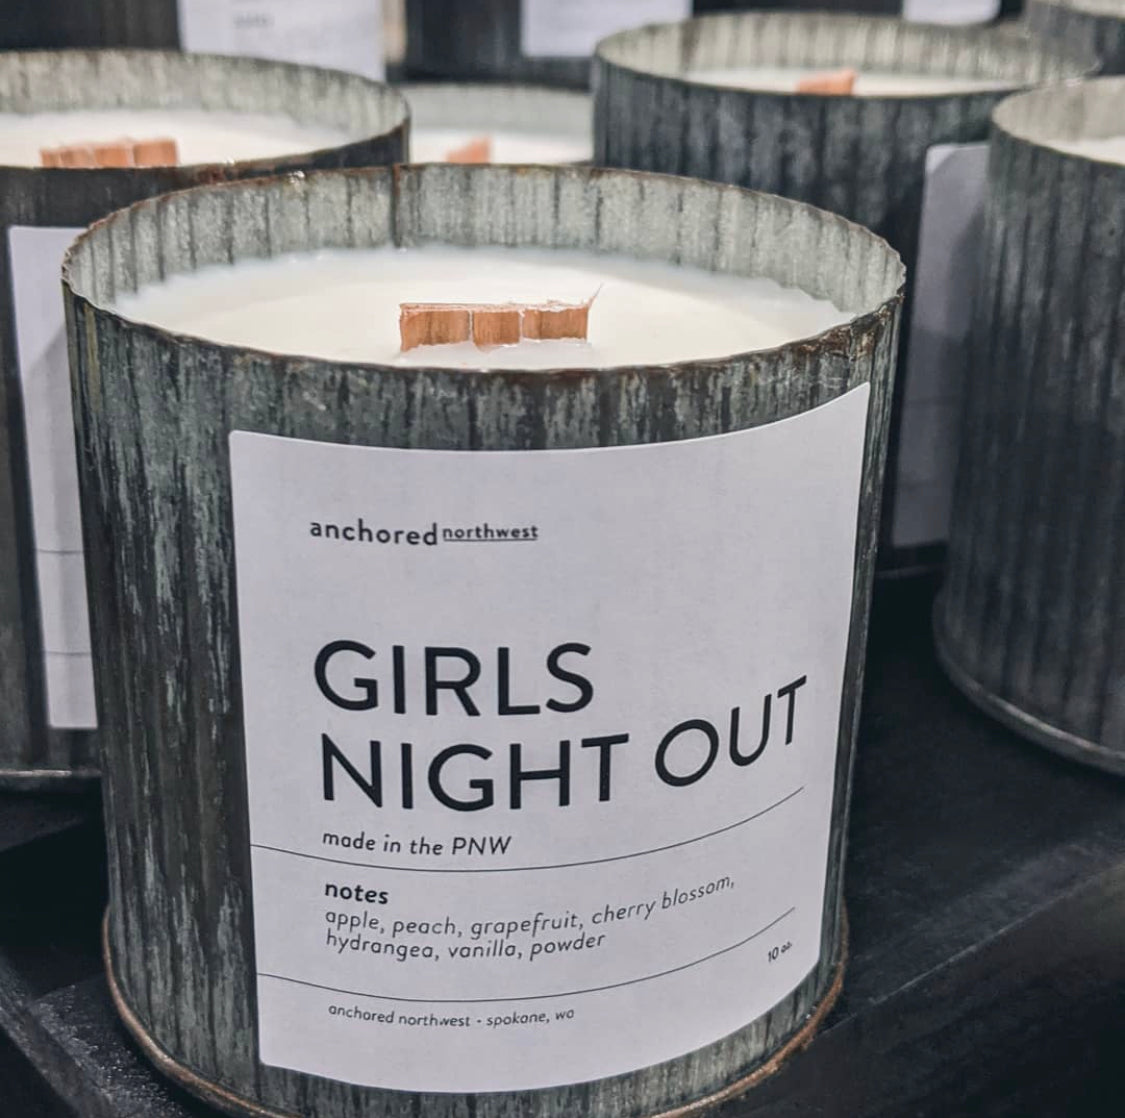 Girls Night Out Wood Wick Rustic Farmhouse Soy Candle